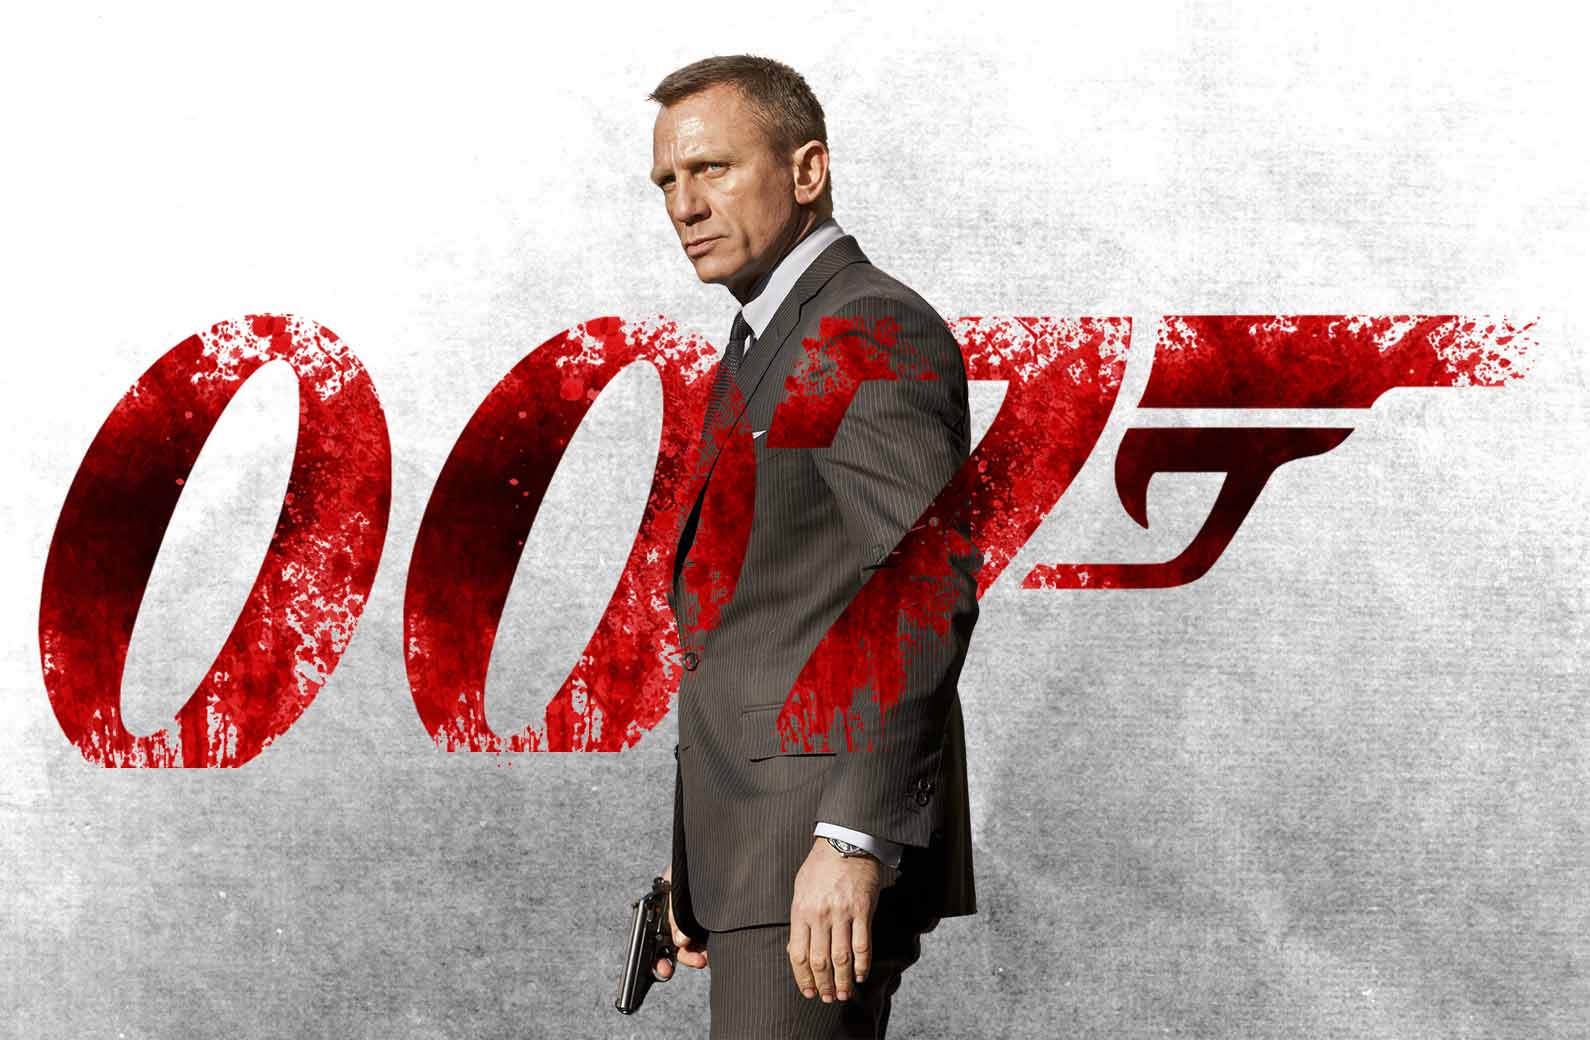 Who will be the next James Bond?